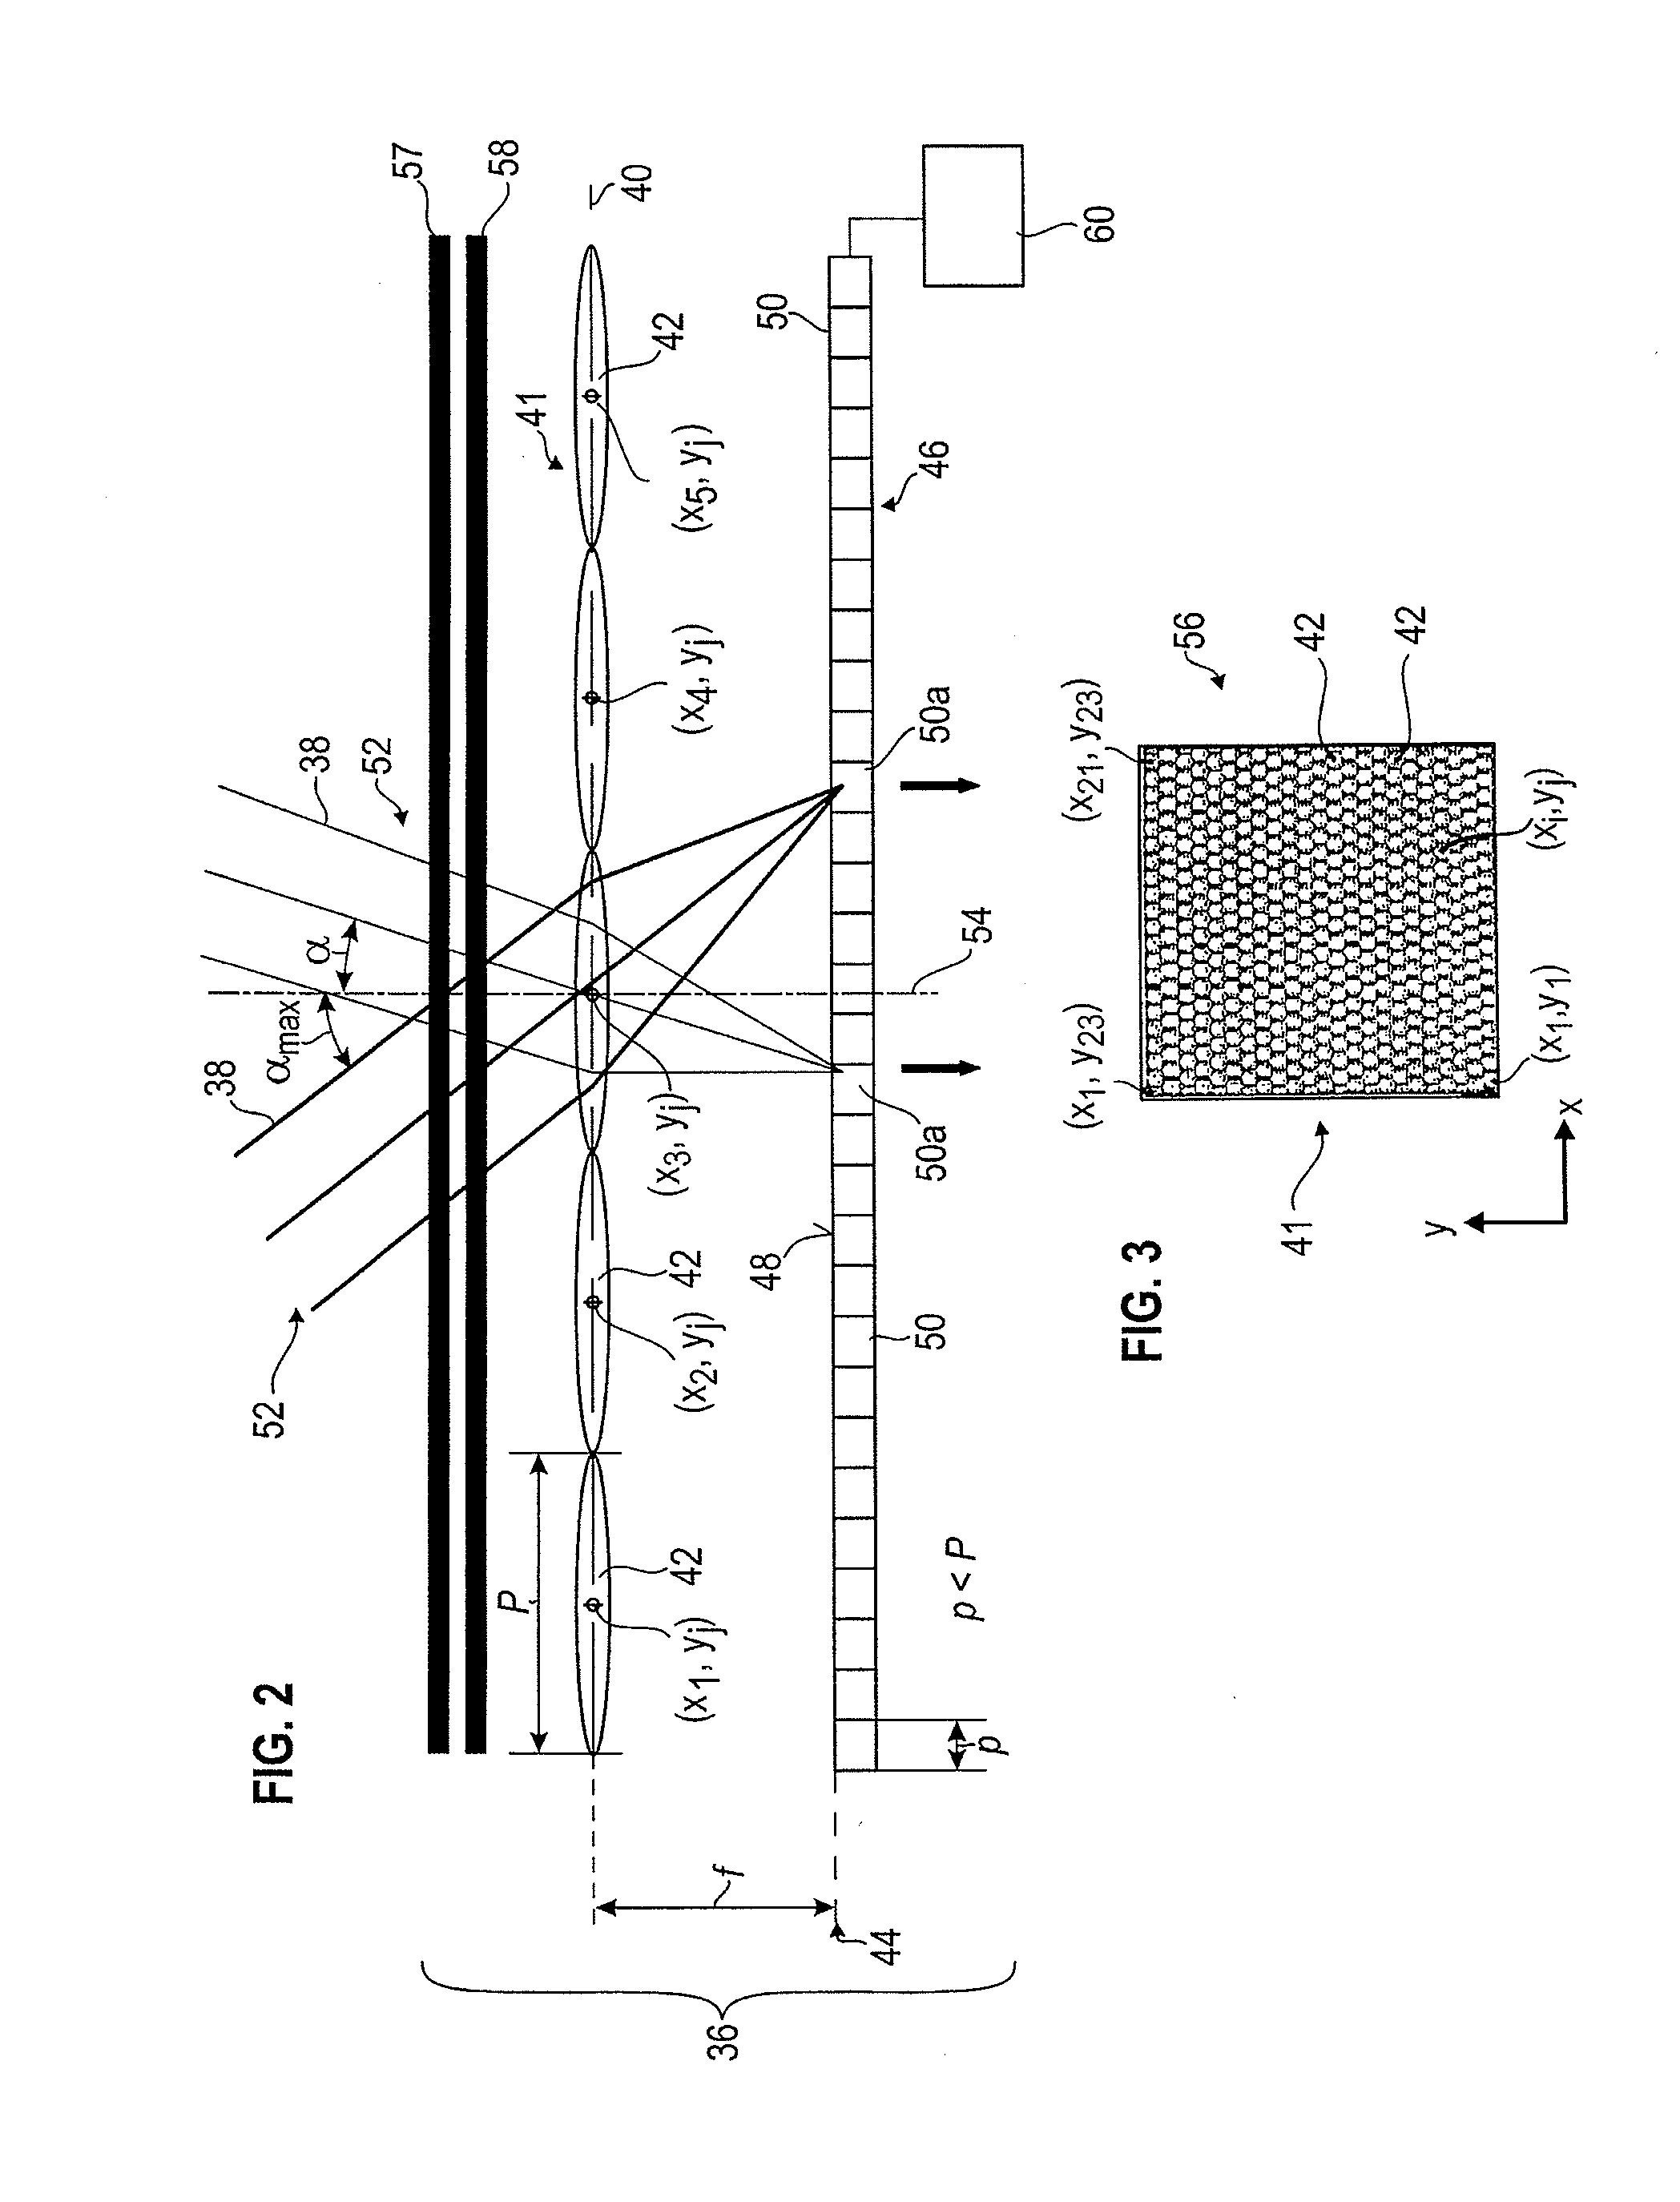 Projection exposure tool for microlithography with a measuring apparatus and method for measuring an irradiation strength distribution